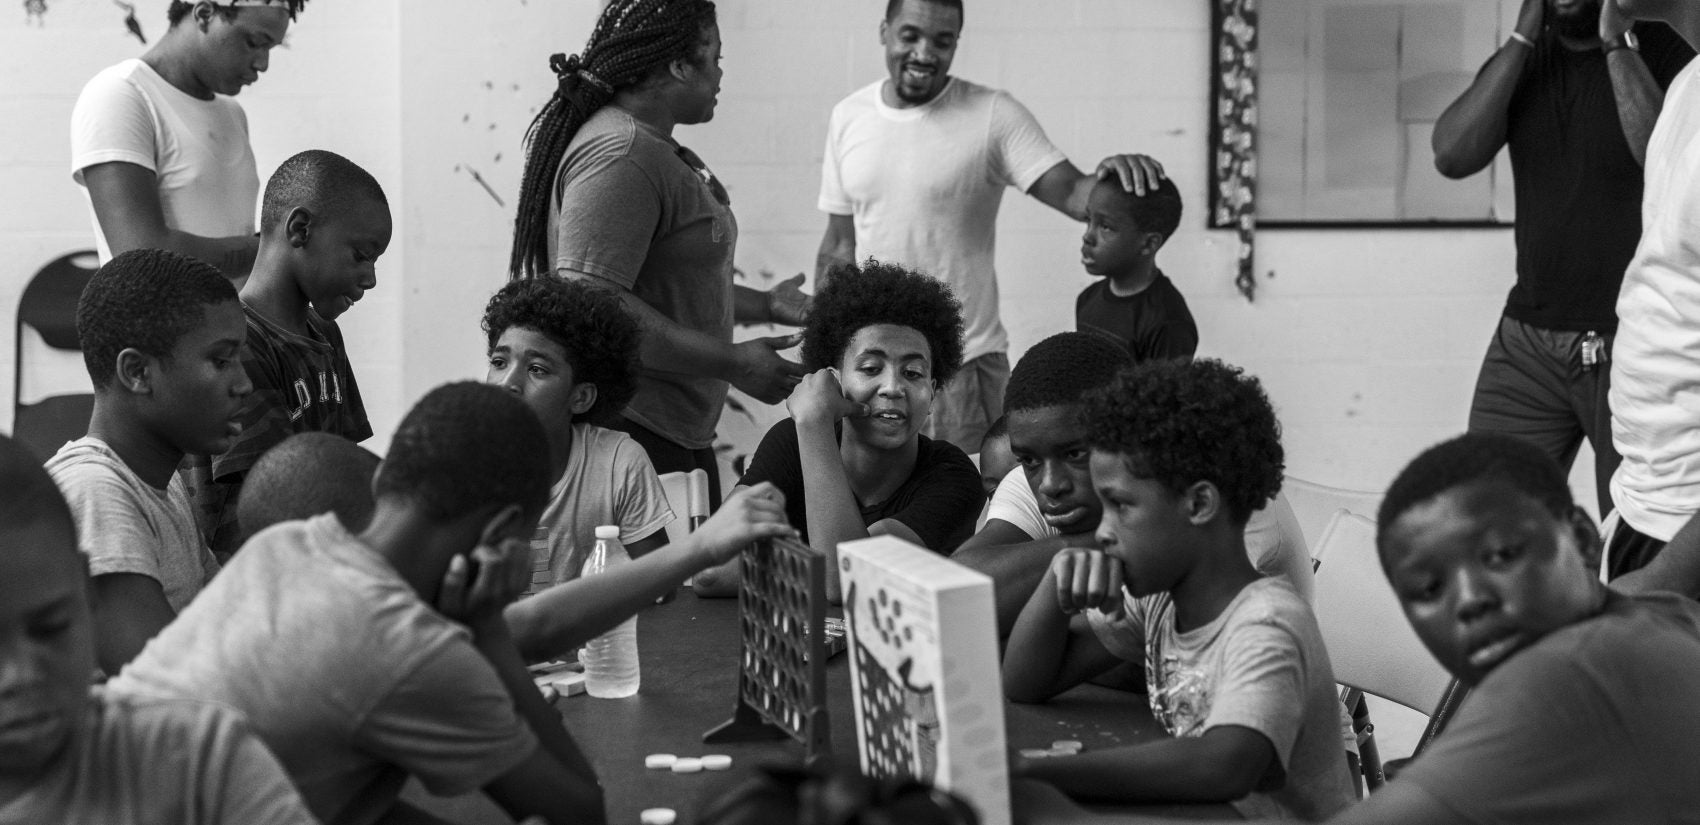 Rahdeem Abdullah (top center) connects with a student in the basement game room at Gathers. Shawn (center) watches younger kids in his role as a counselor in Aunt Cheryl's day camp. (Jessica Kourkounis for Keystone Crossroads)